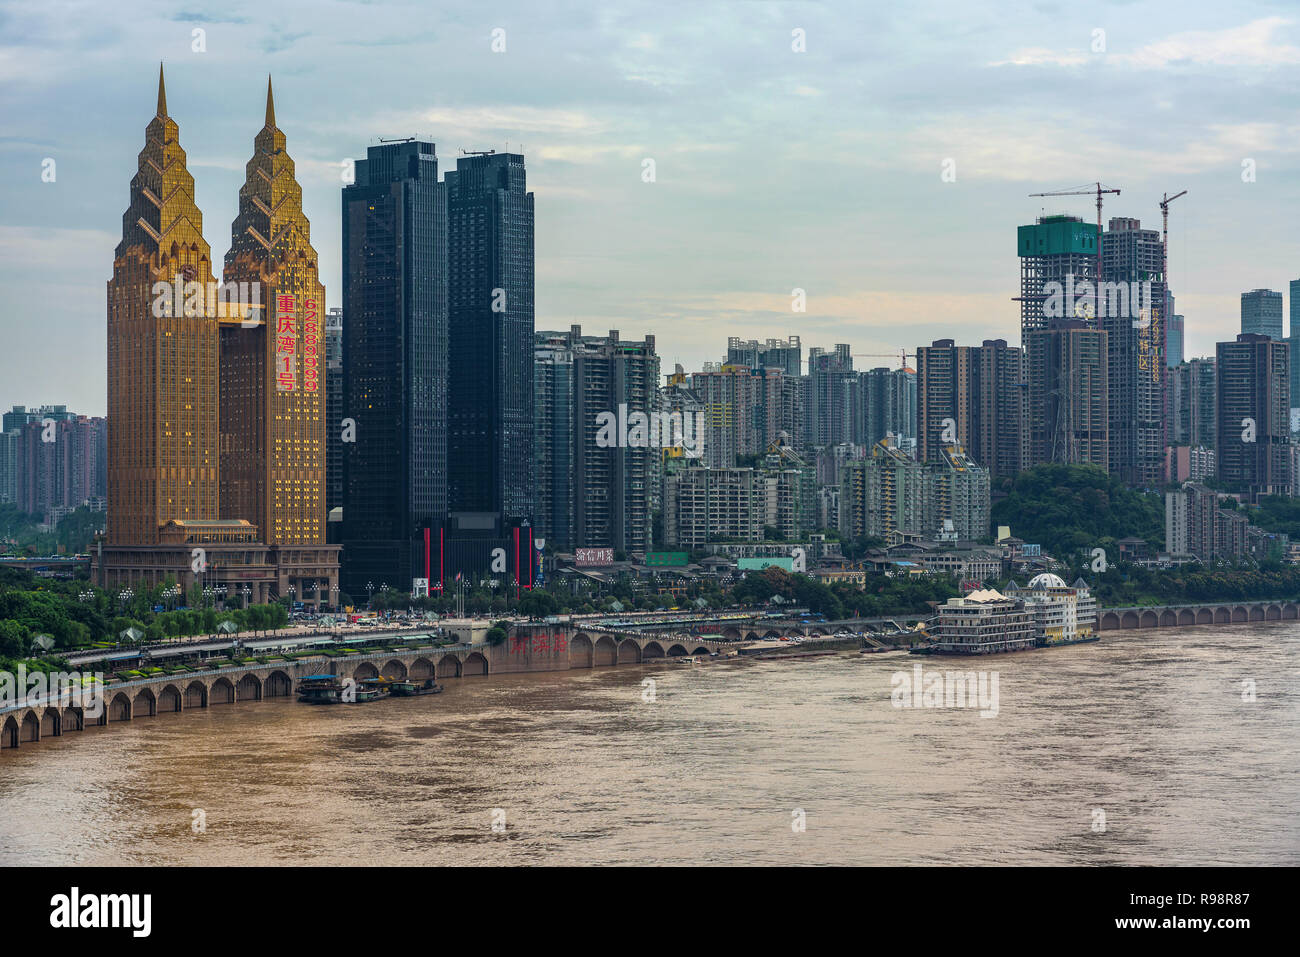 CHONGQING, CHINA - SEPTEMBER 21: Riverside city view of the Sheraton hotel building which is known for its unique gold colour and twin towers design o Stock Photo